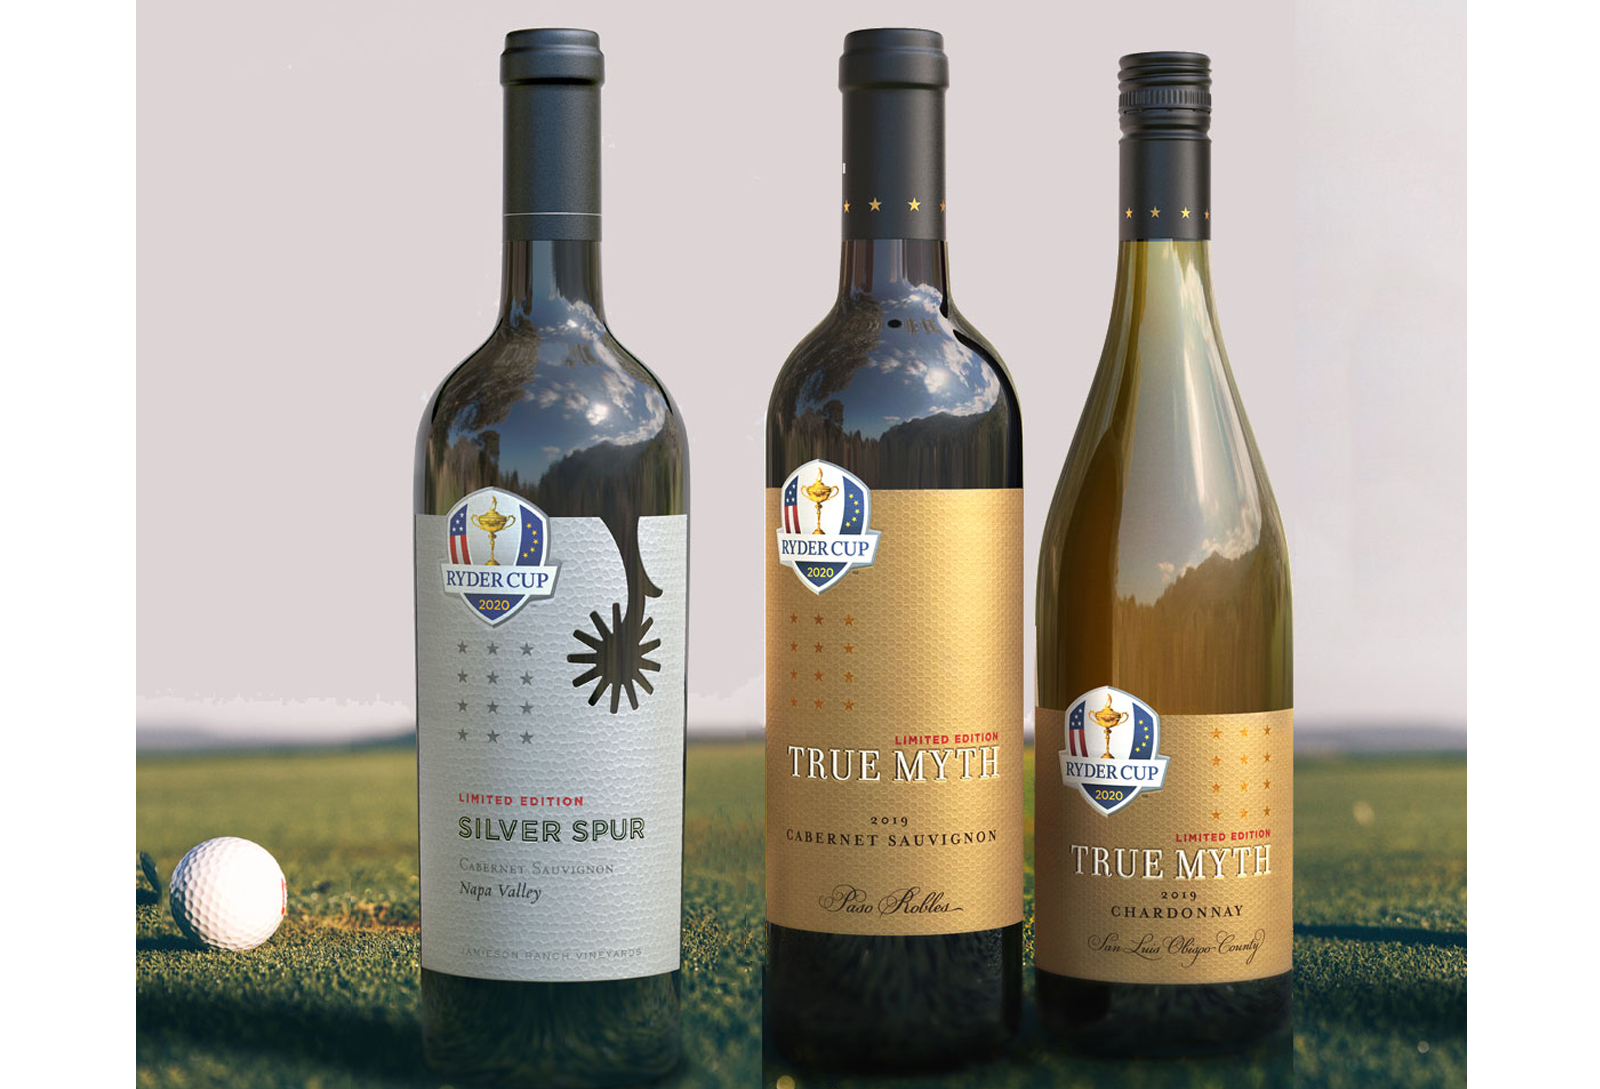 Silver Spur and True Myth Limited Edition Ryder Cup Wines hero 2